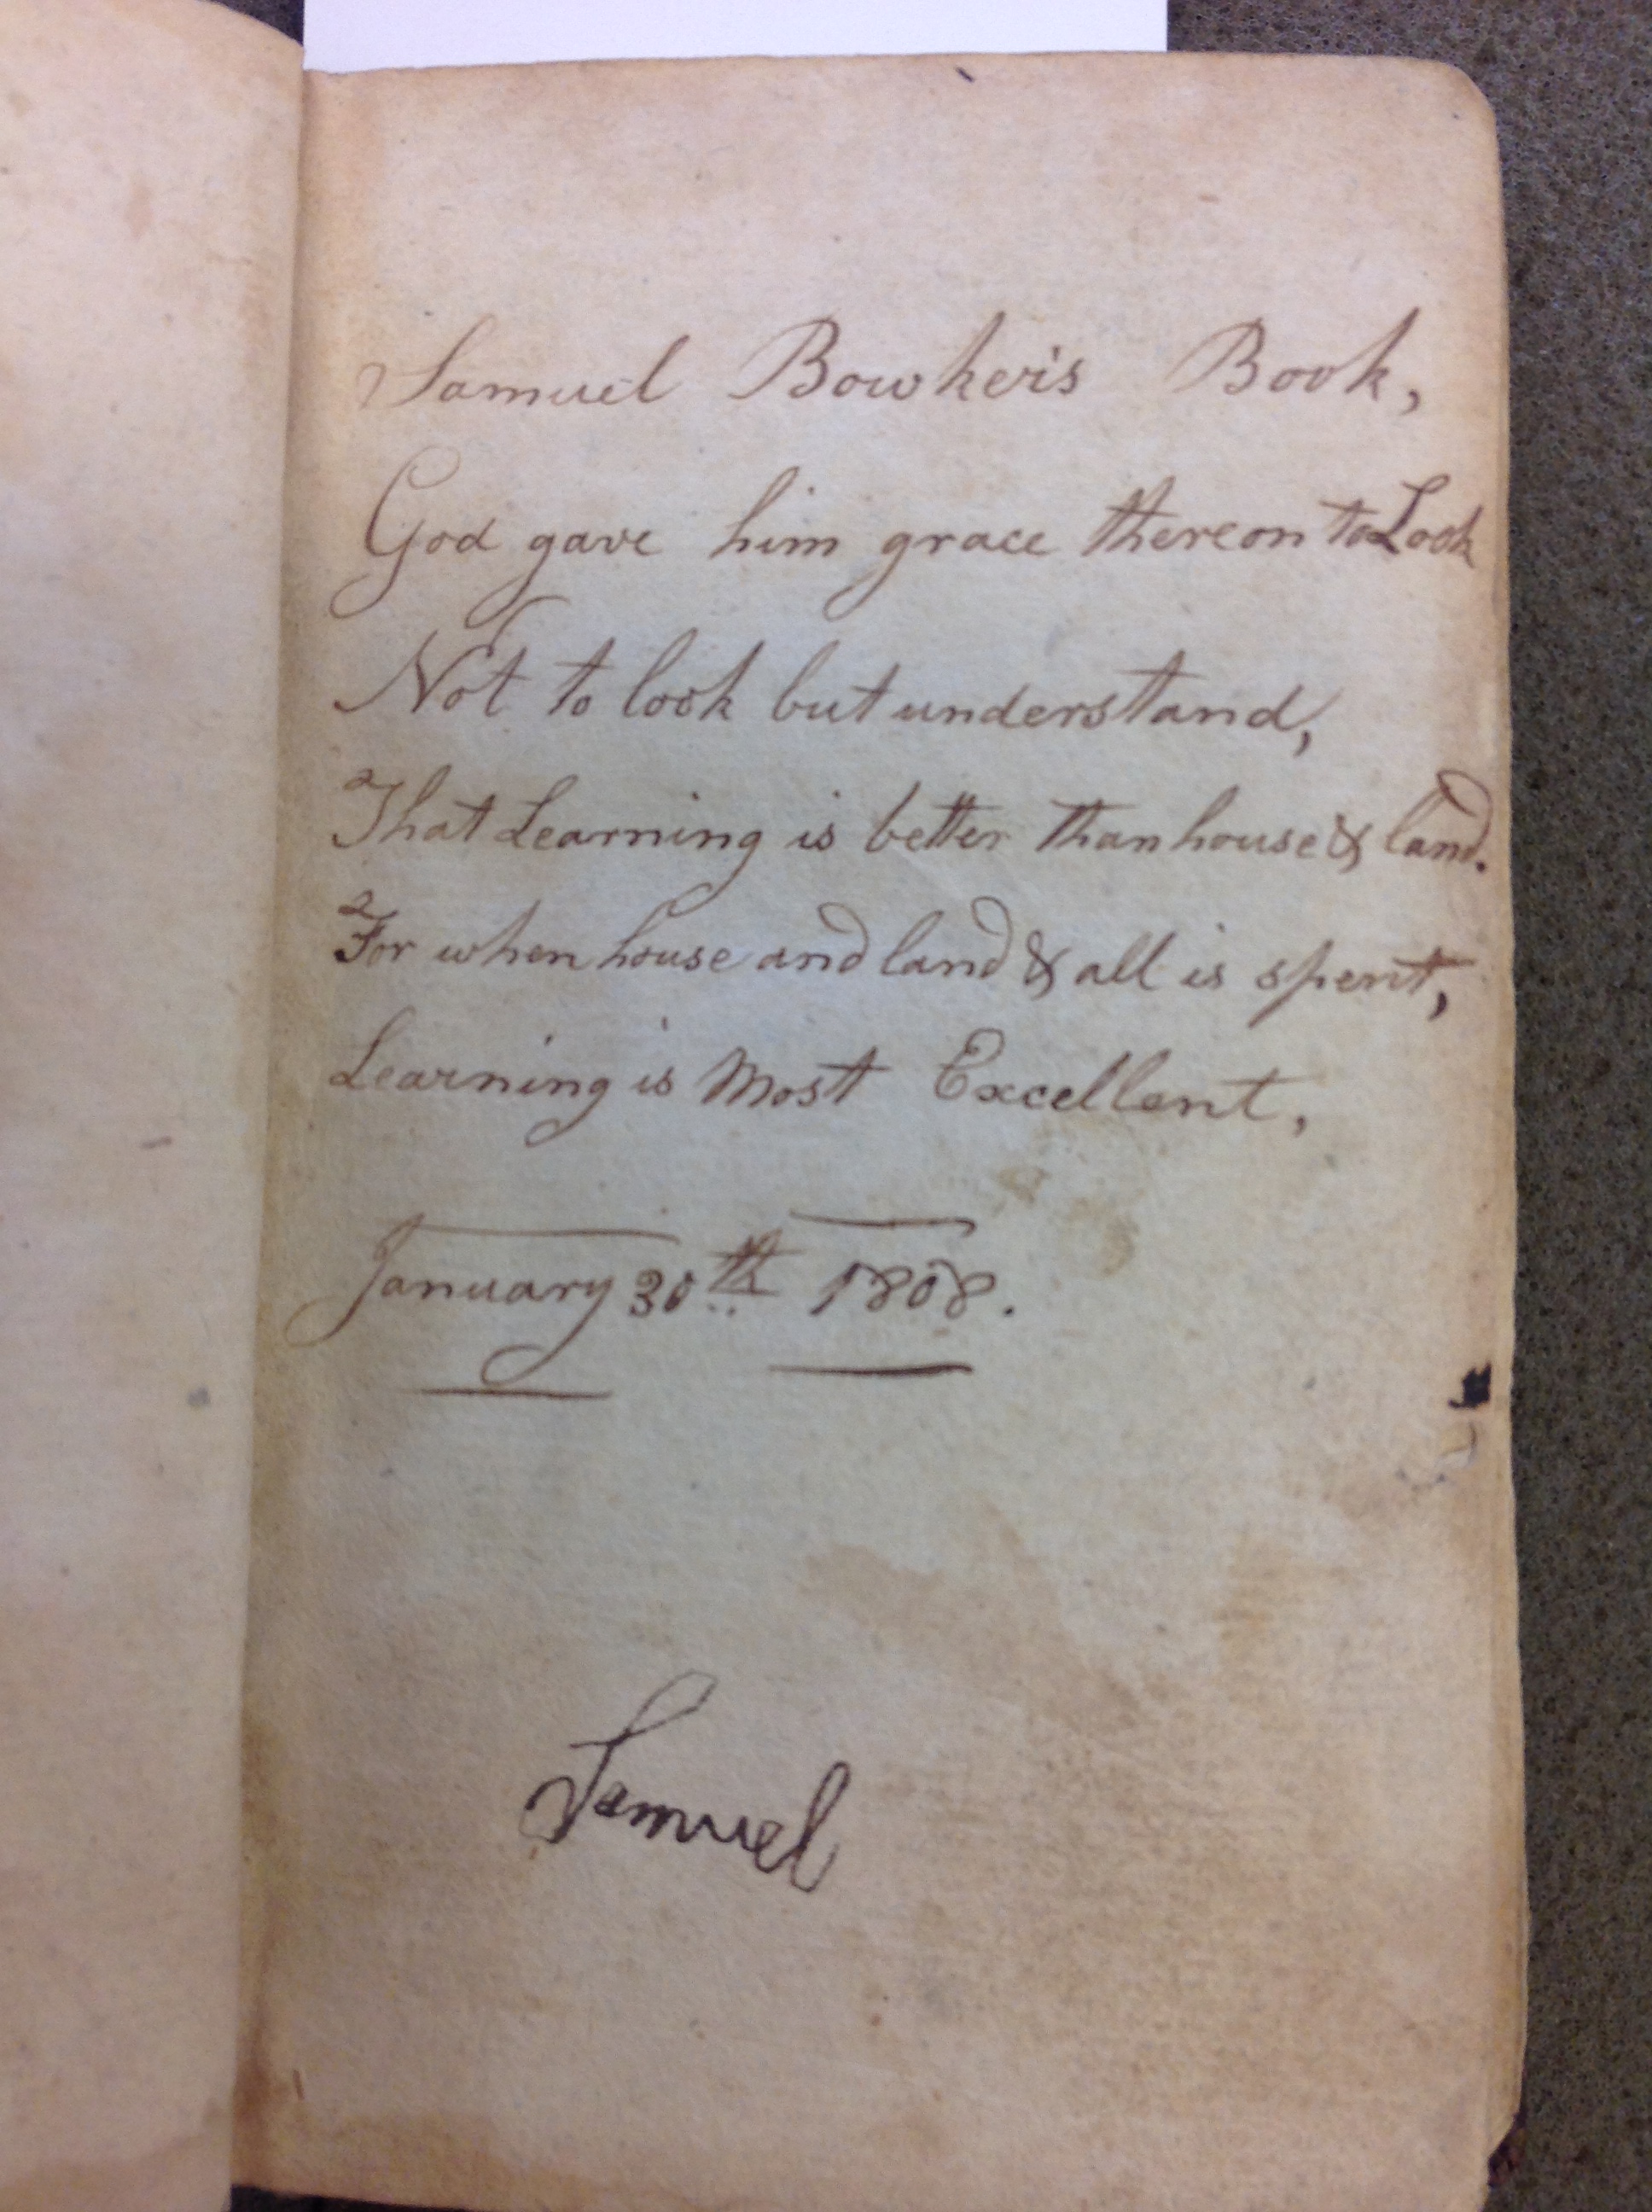 Flyleaf rhyme: "Samuel Bowker's book, God gave him grace therein to look. Not to look but understand, that learning is better than house & land. For when house and land and all is spent, learning is most excellent. January 30th 1808."